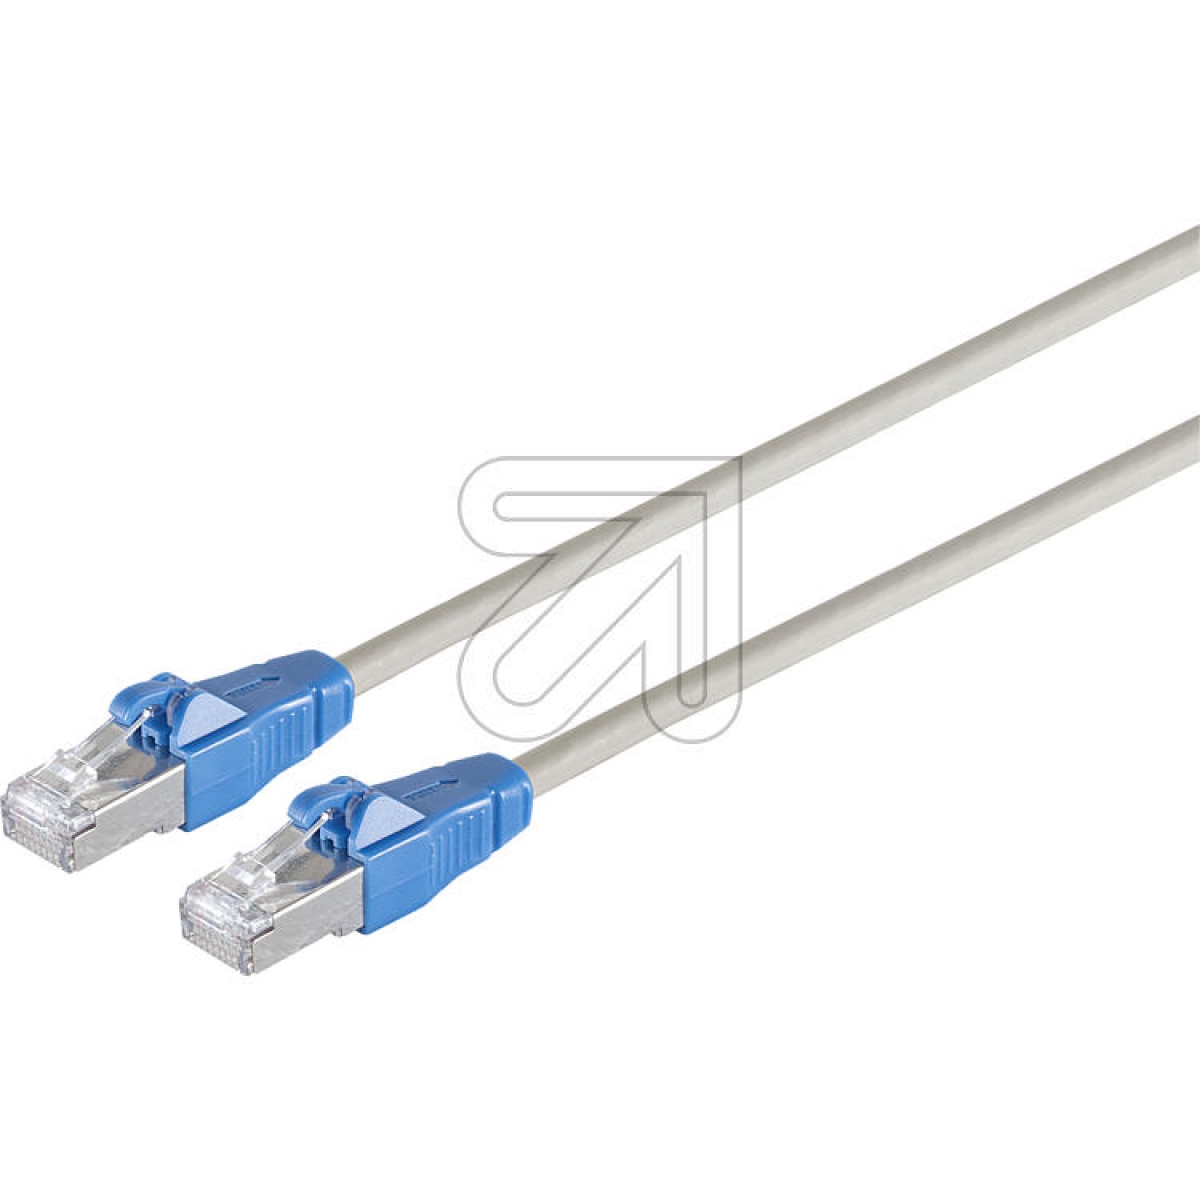 S-ConnEASY-PULL patch cable, CAT6A, gray, 3.0m 08-27040Article-No: 236040